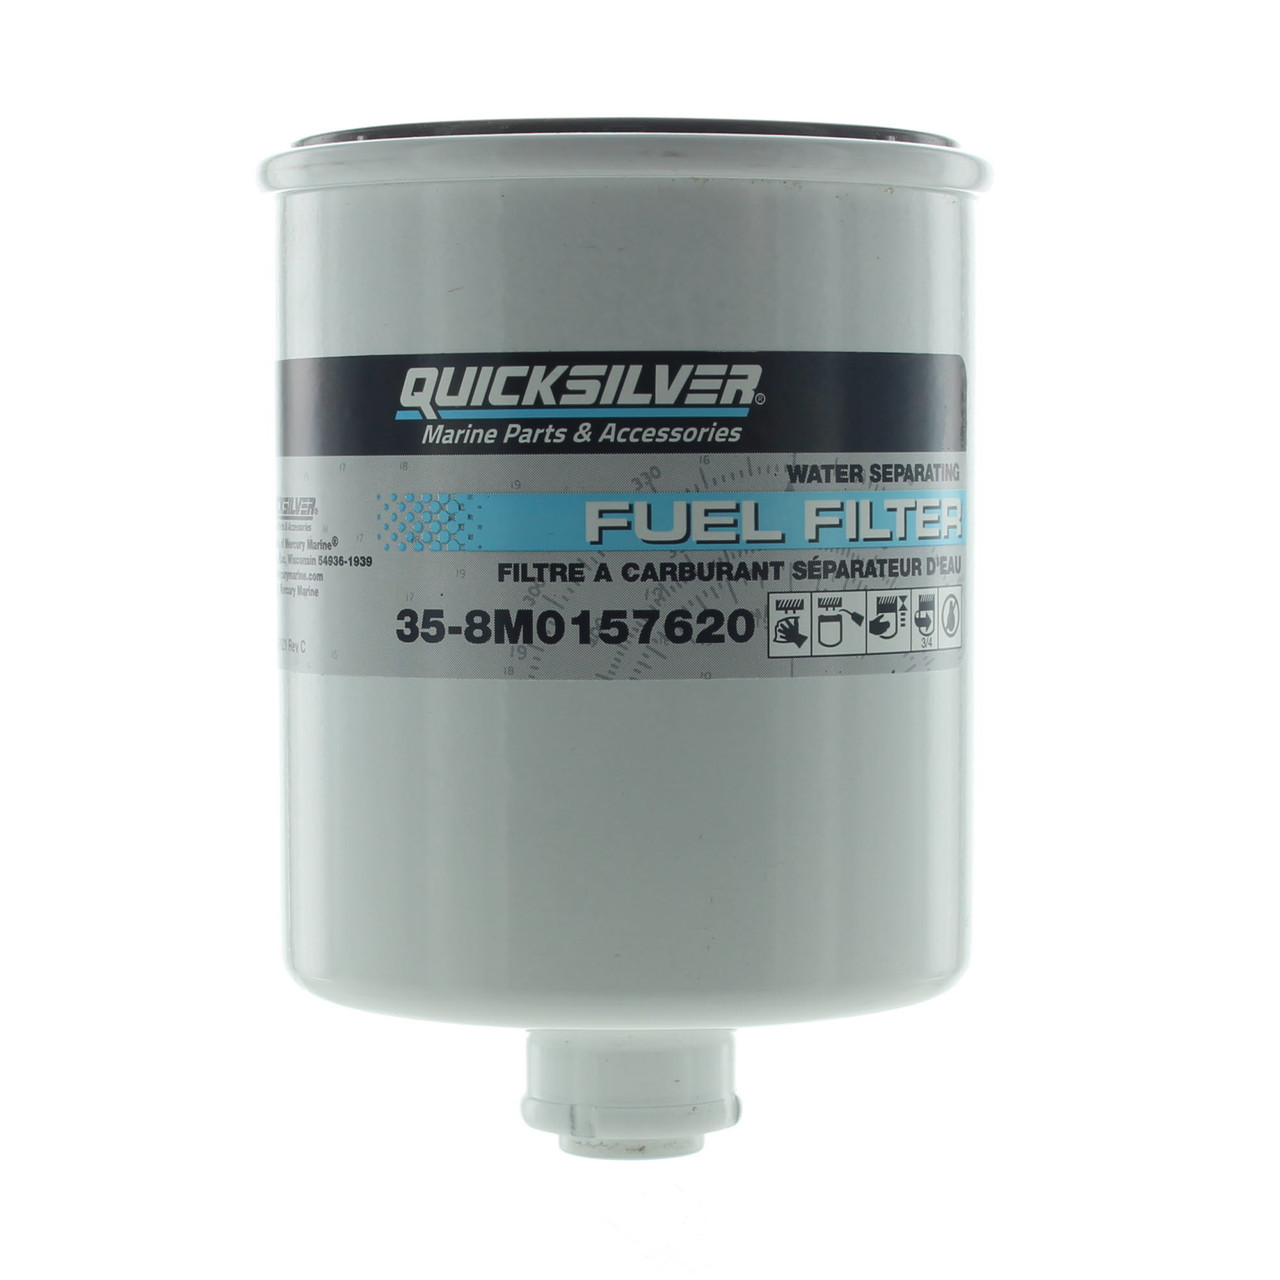 Quicksilver New OEM Water Separating Fuel Filter, 8M0157620